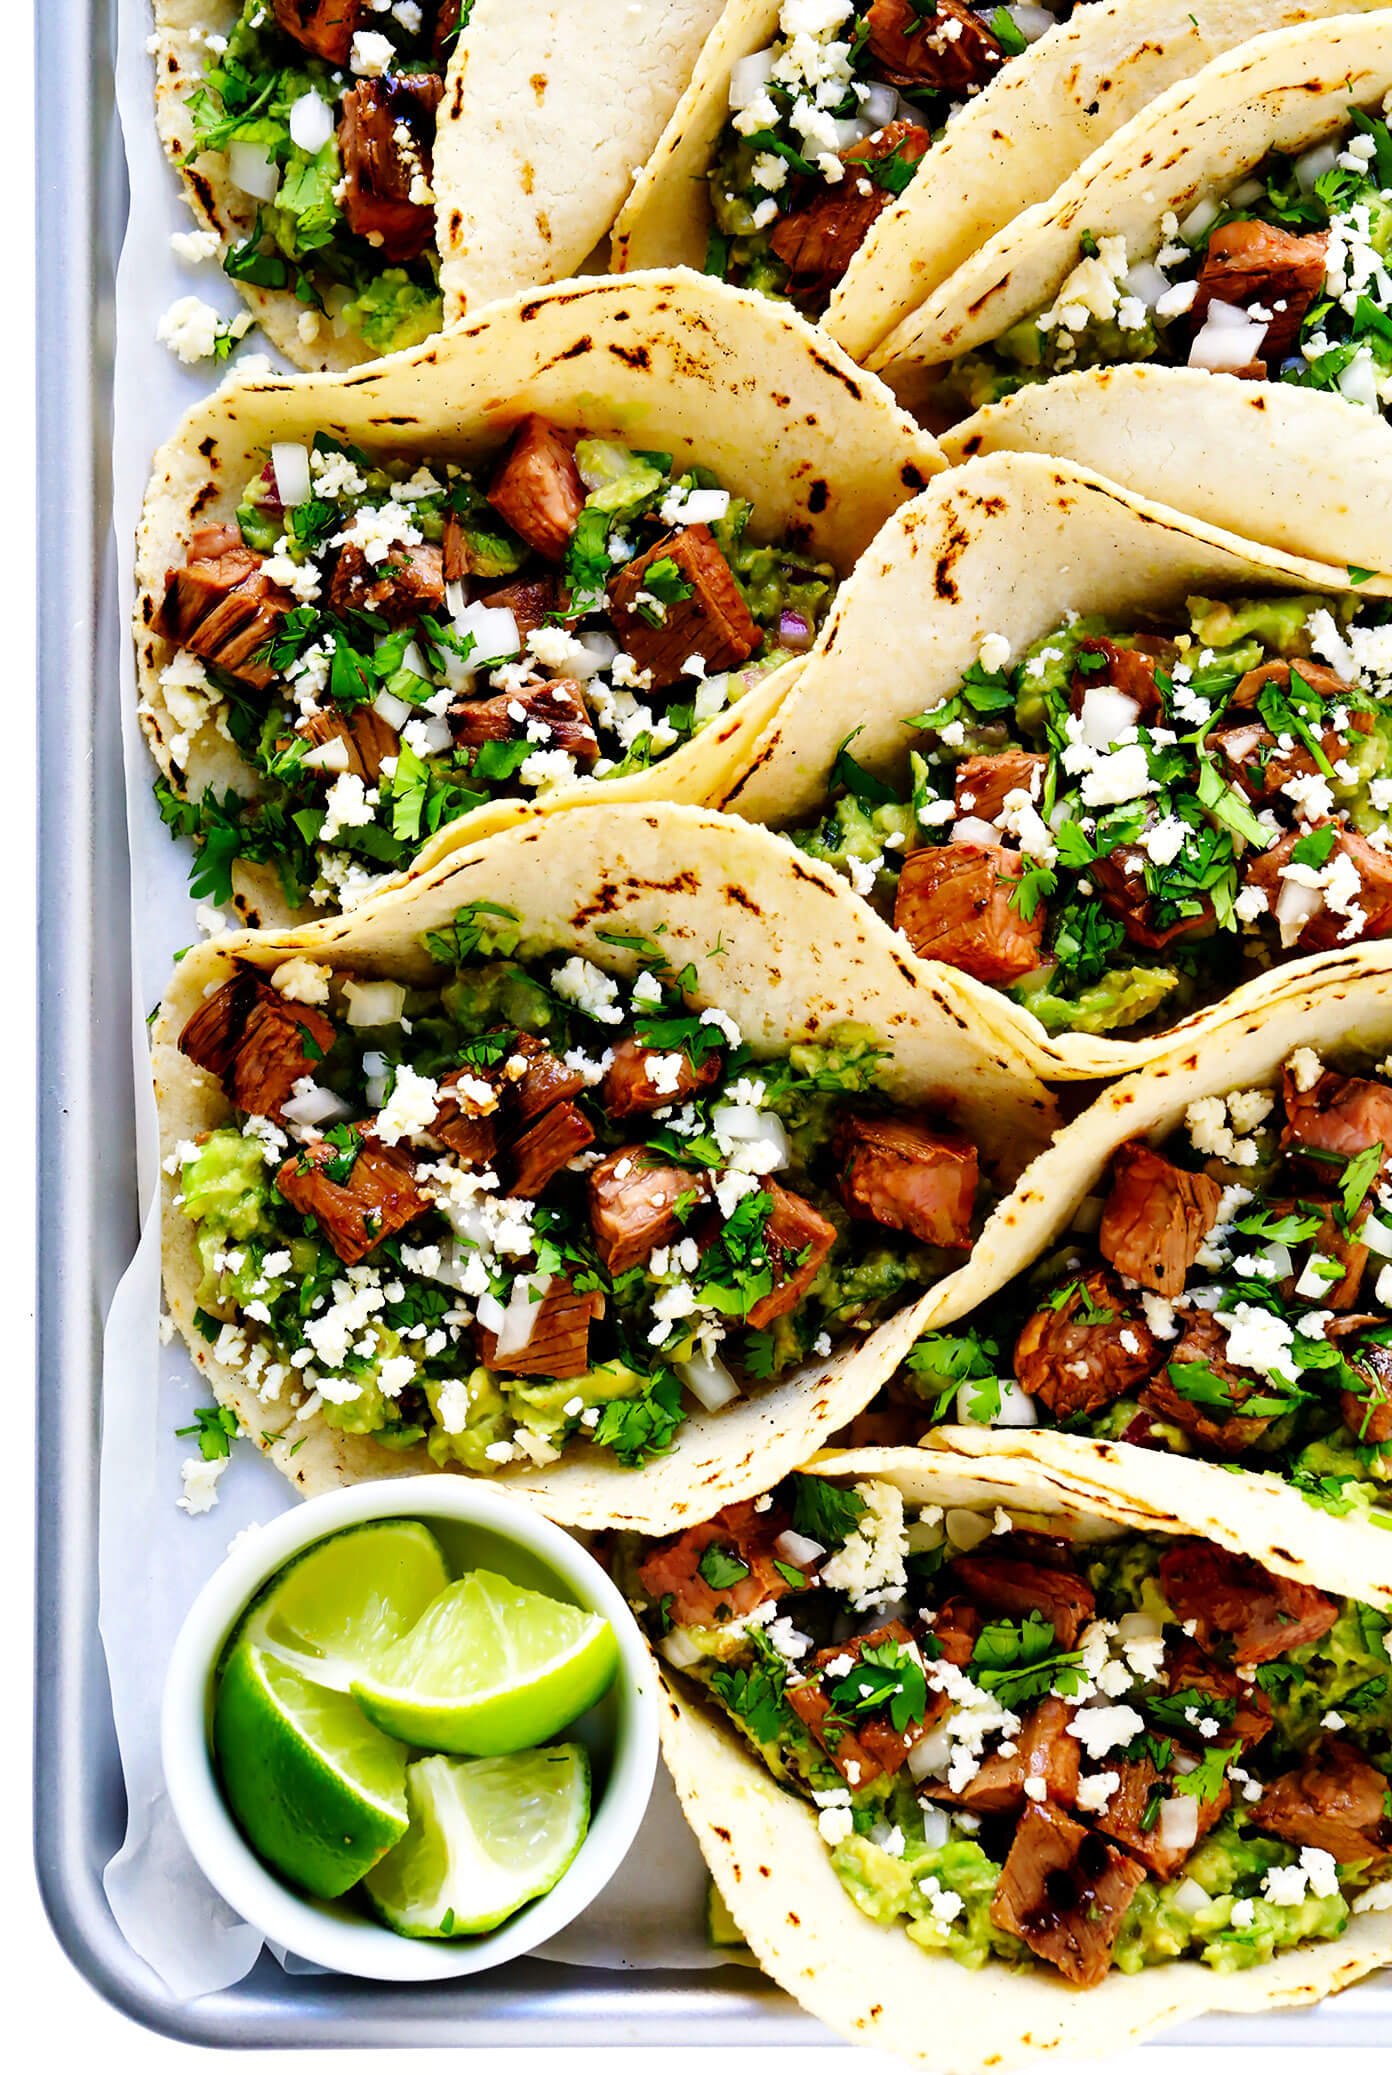 Tray of Carne Asada Tacos with Lime, Guacamole and Queso Fresco